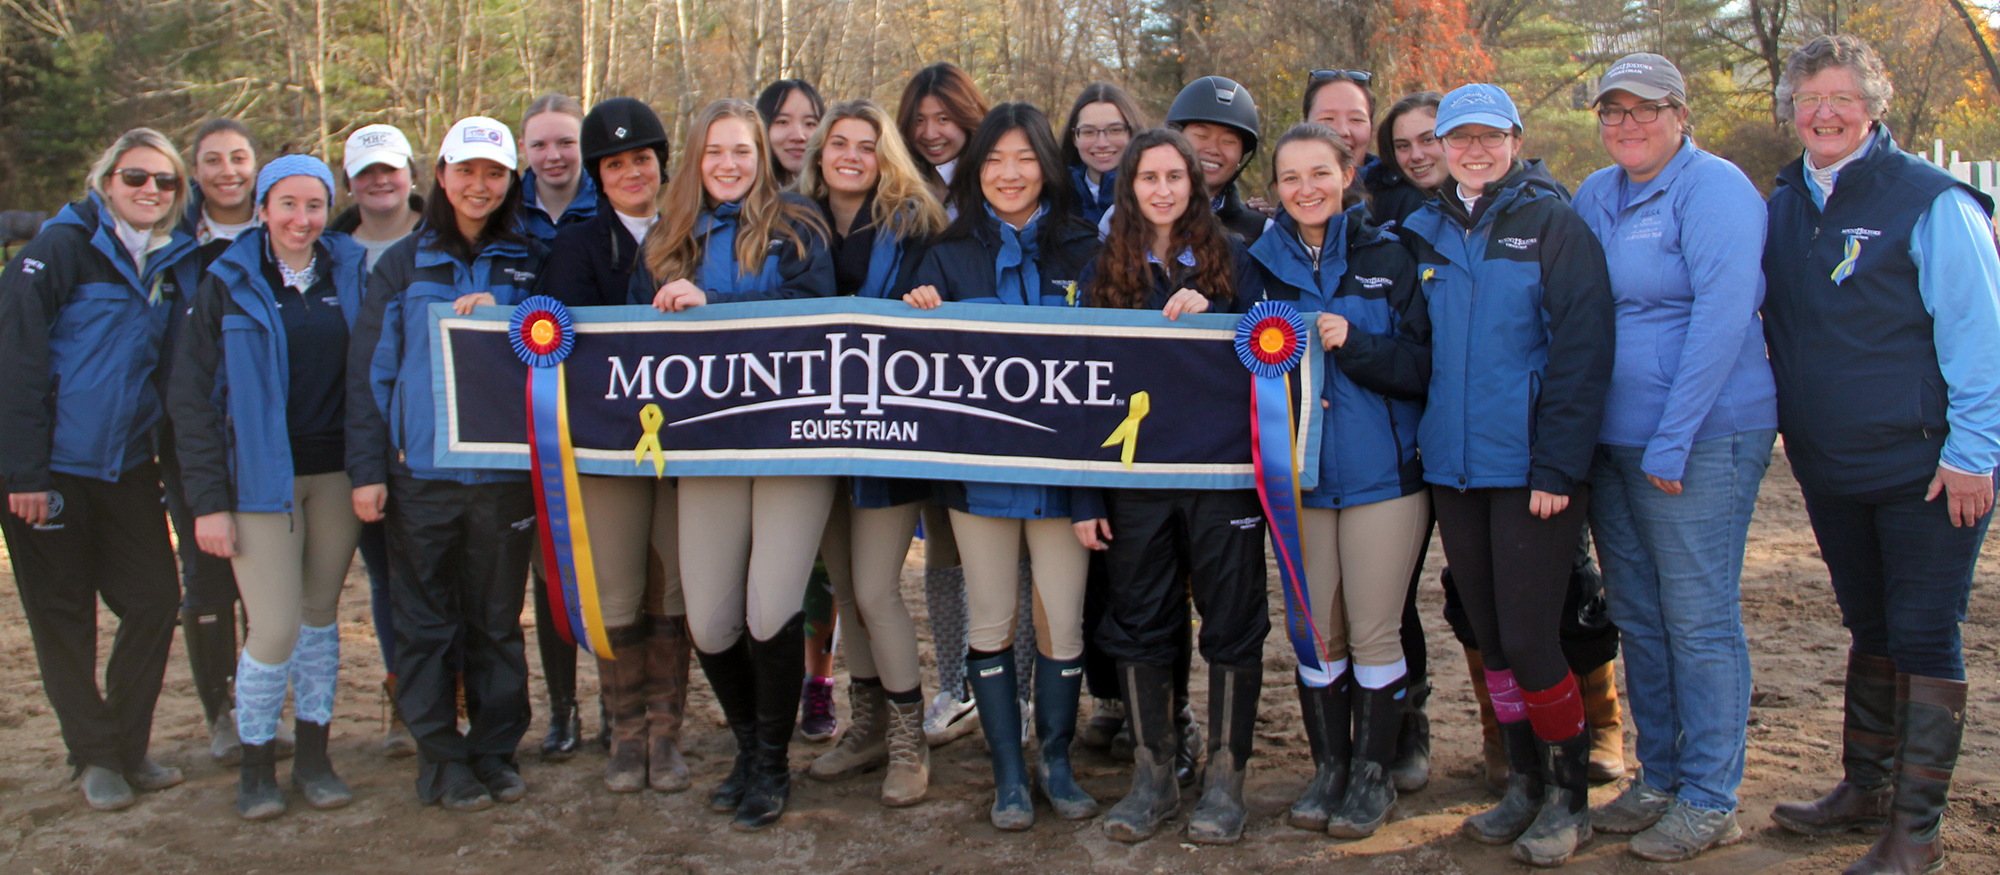 Photo of the Lyons riding team following their High Point win at the UMass Show on Nov. 4, 2018.